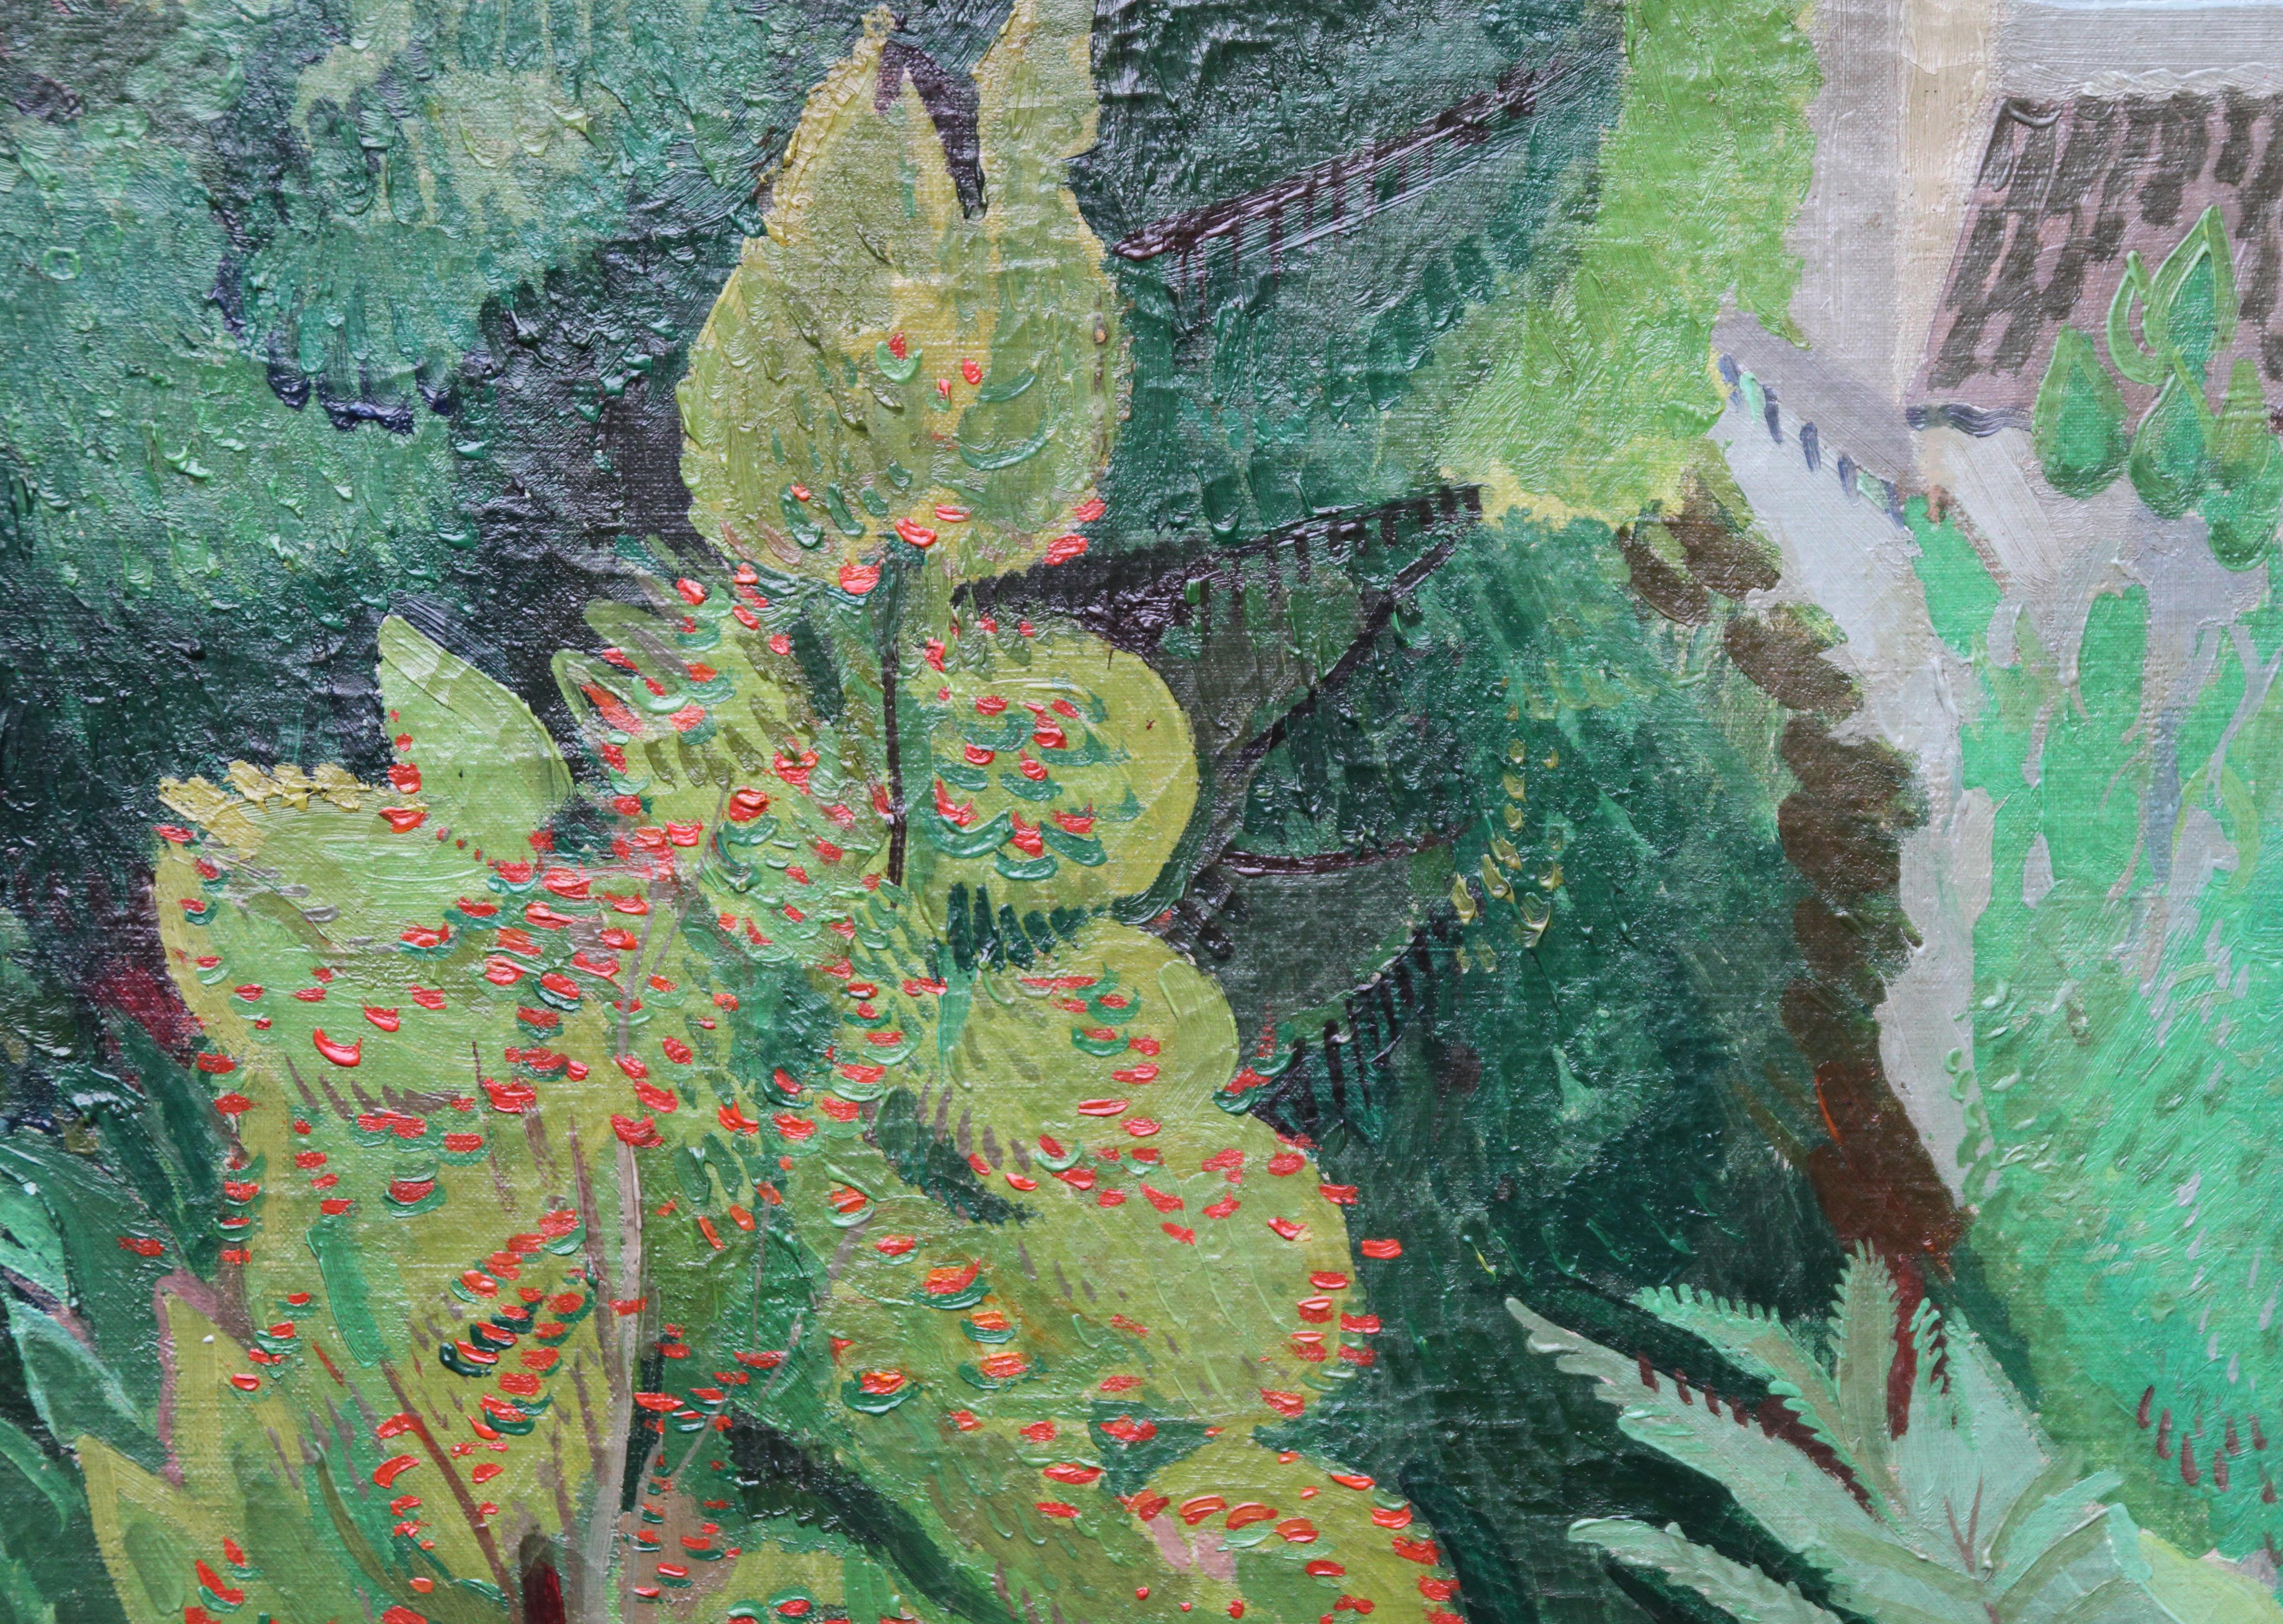 This stunning Post Impressionist oil on canvas of trees is attributed to the circle of British Modernist artist Duncan Grant circa 1930. There is wonderful detail of foliage and berries from a number of trees of all shades of green, set in a